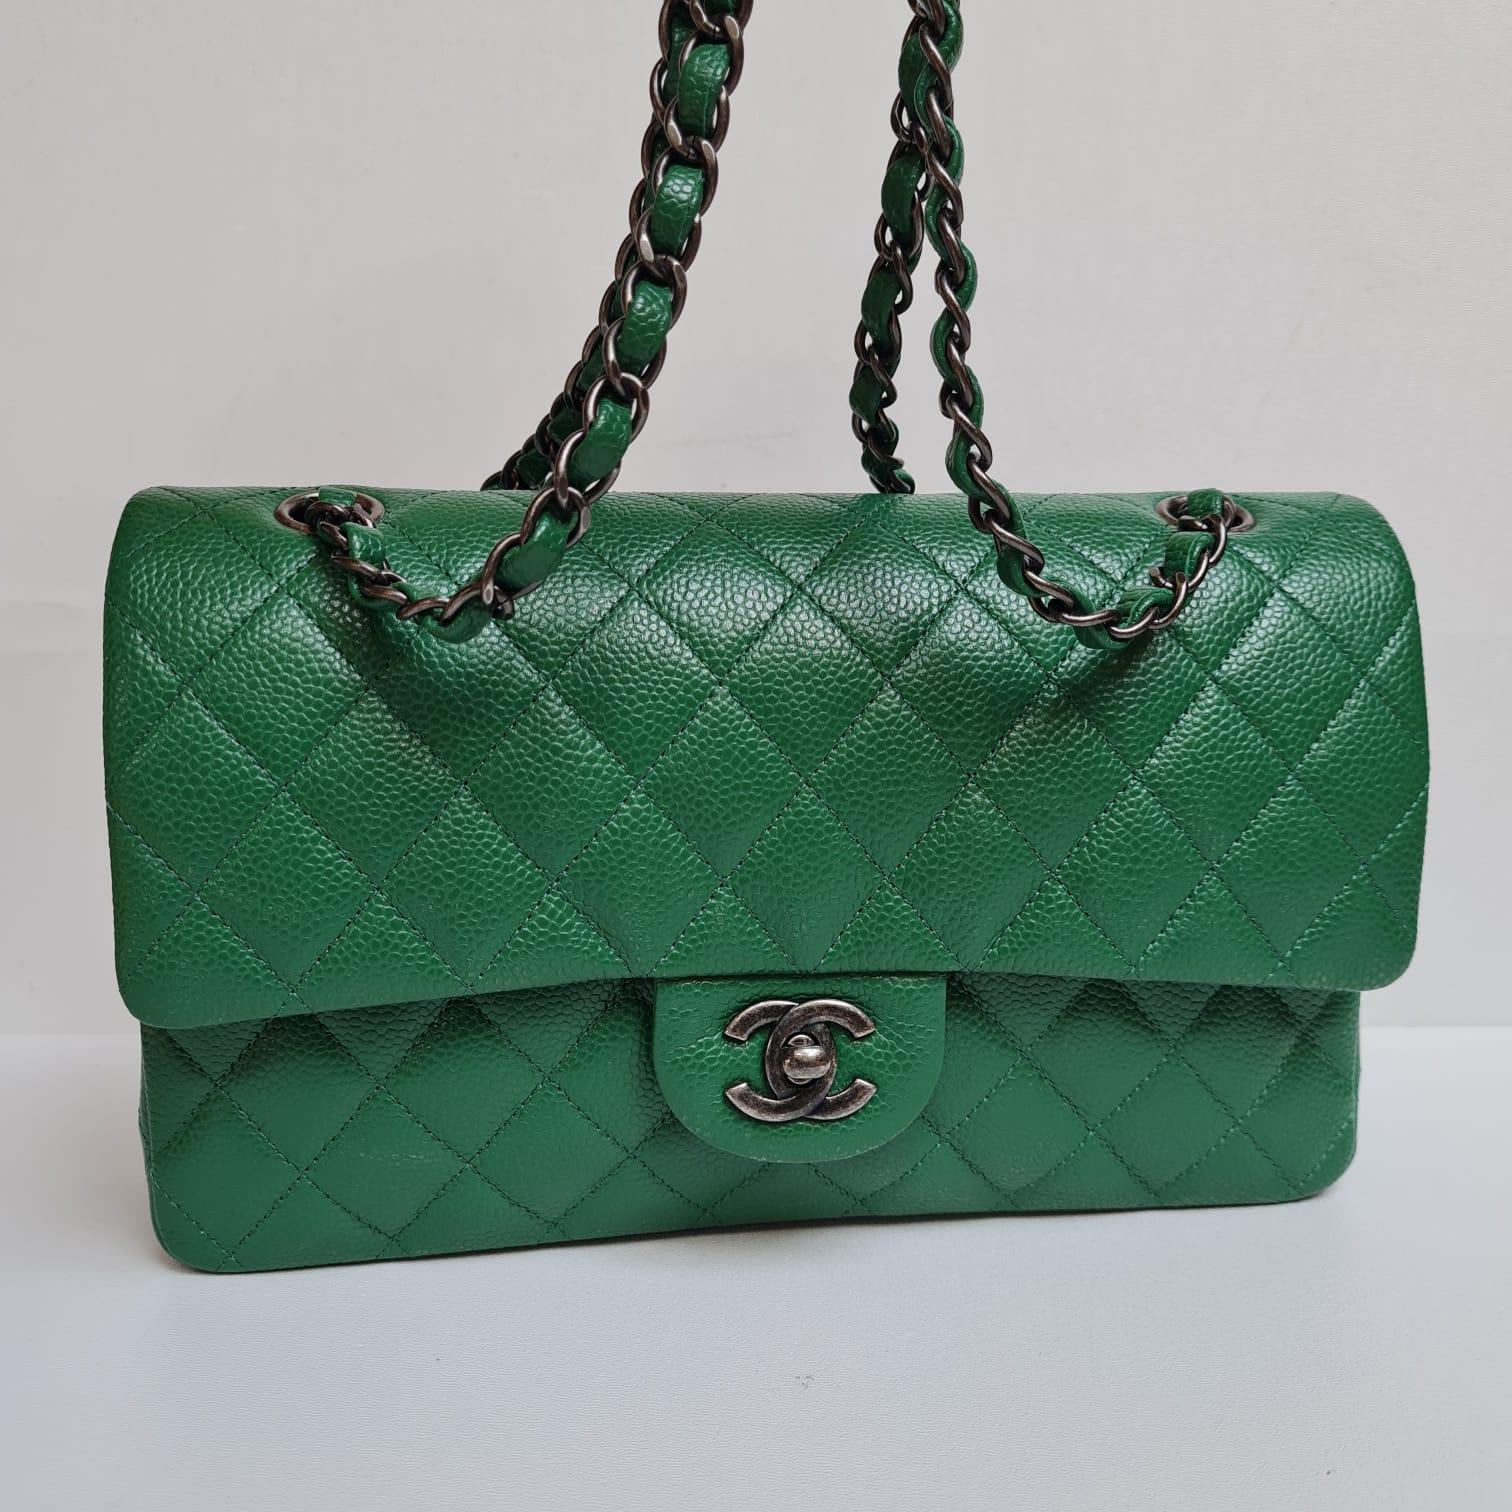 Rare Chanel Emerald Green Caviar Quilted Classic Medium Double Flap Bag RHW 8